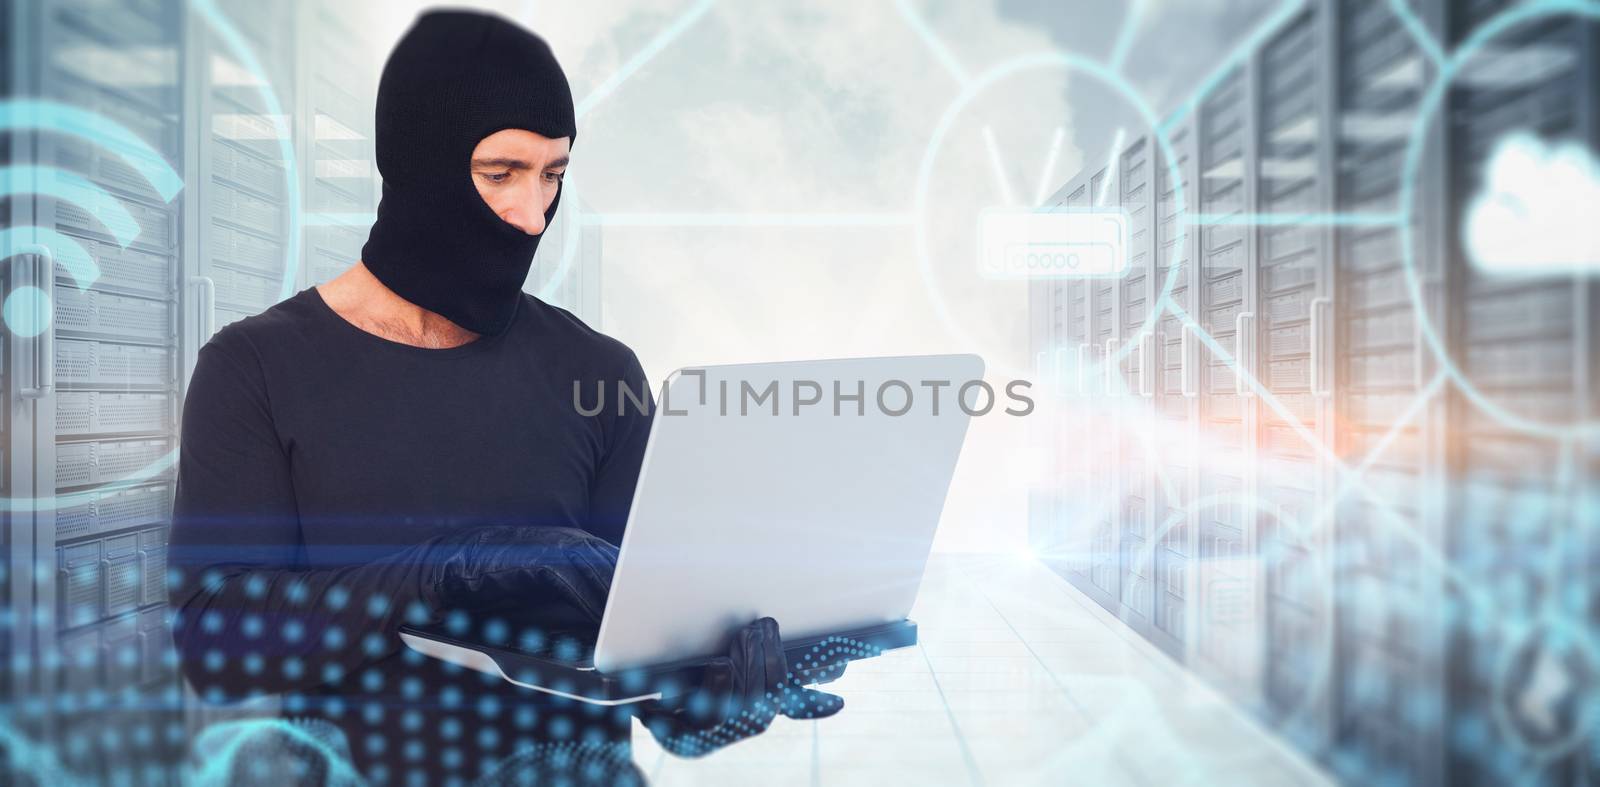 Burglar with balaclava hacking a laptop against abstract glowing black background